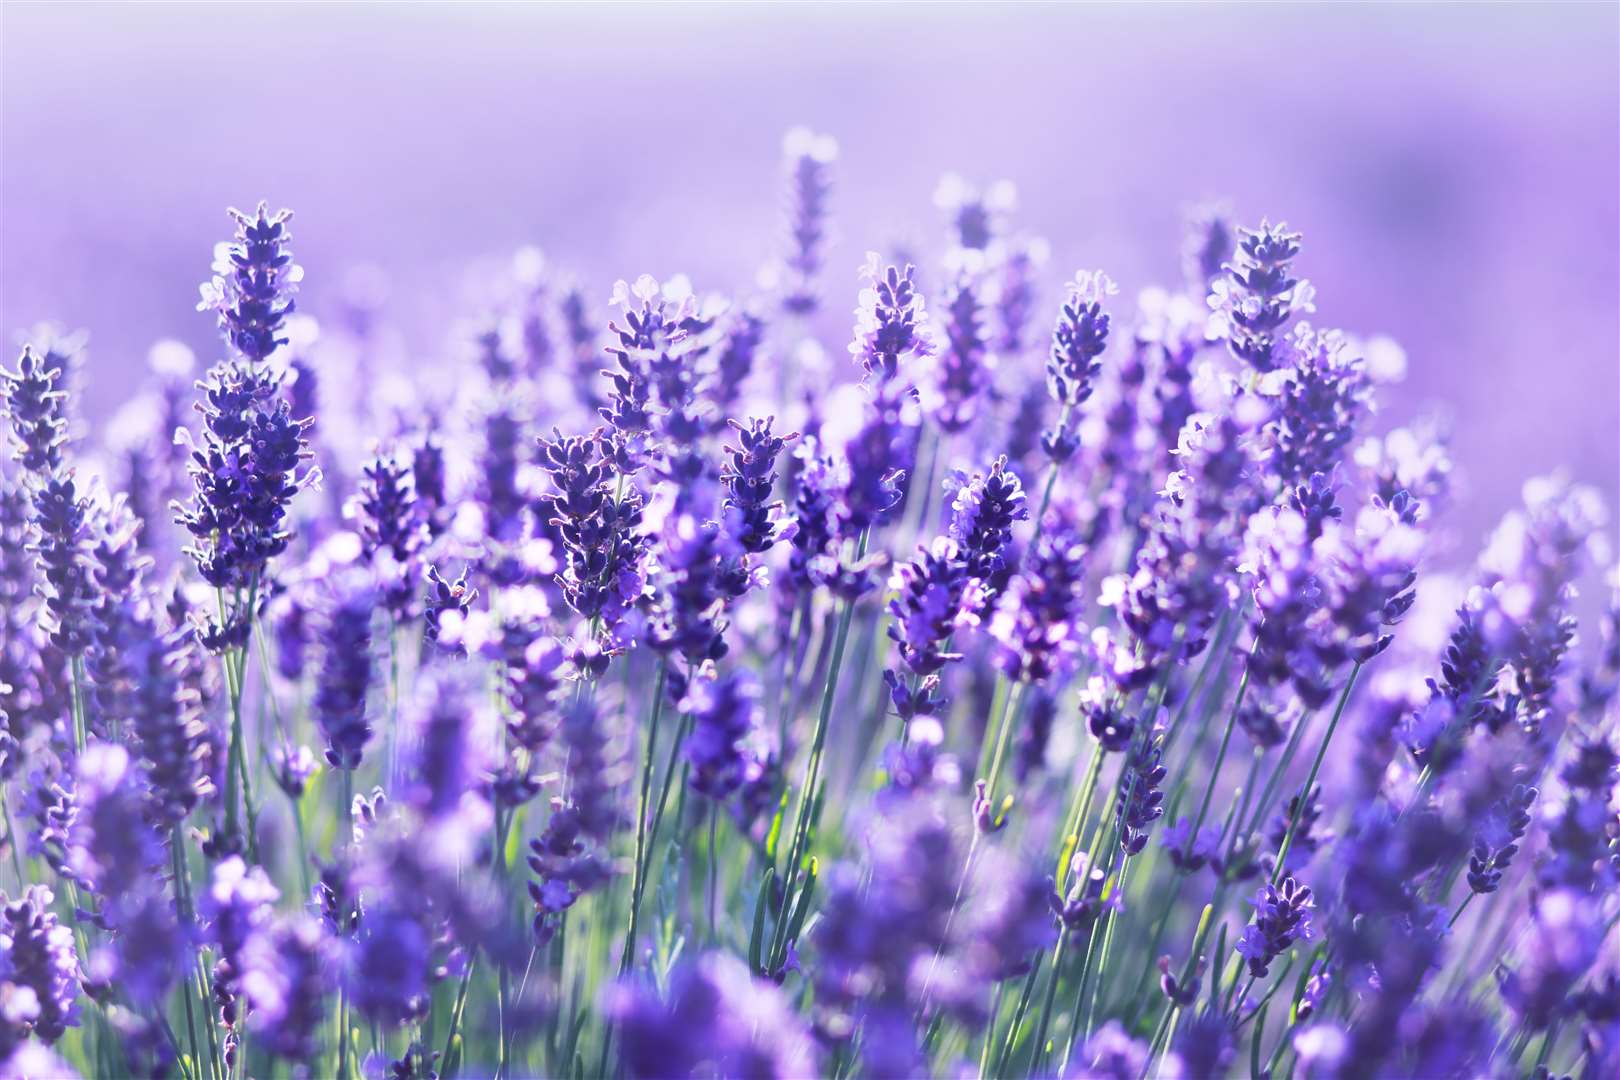 The smell of lavender will deter mating spiders